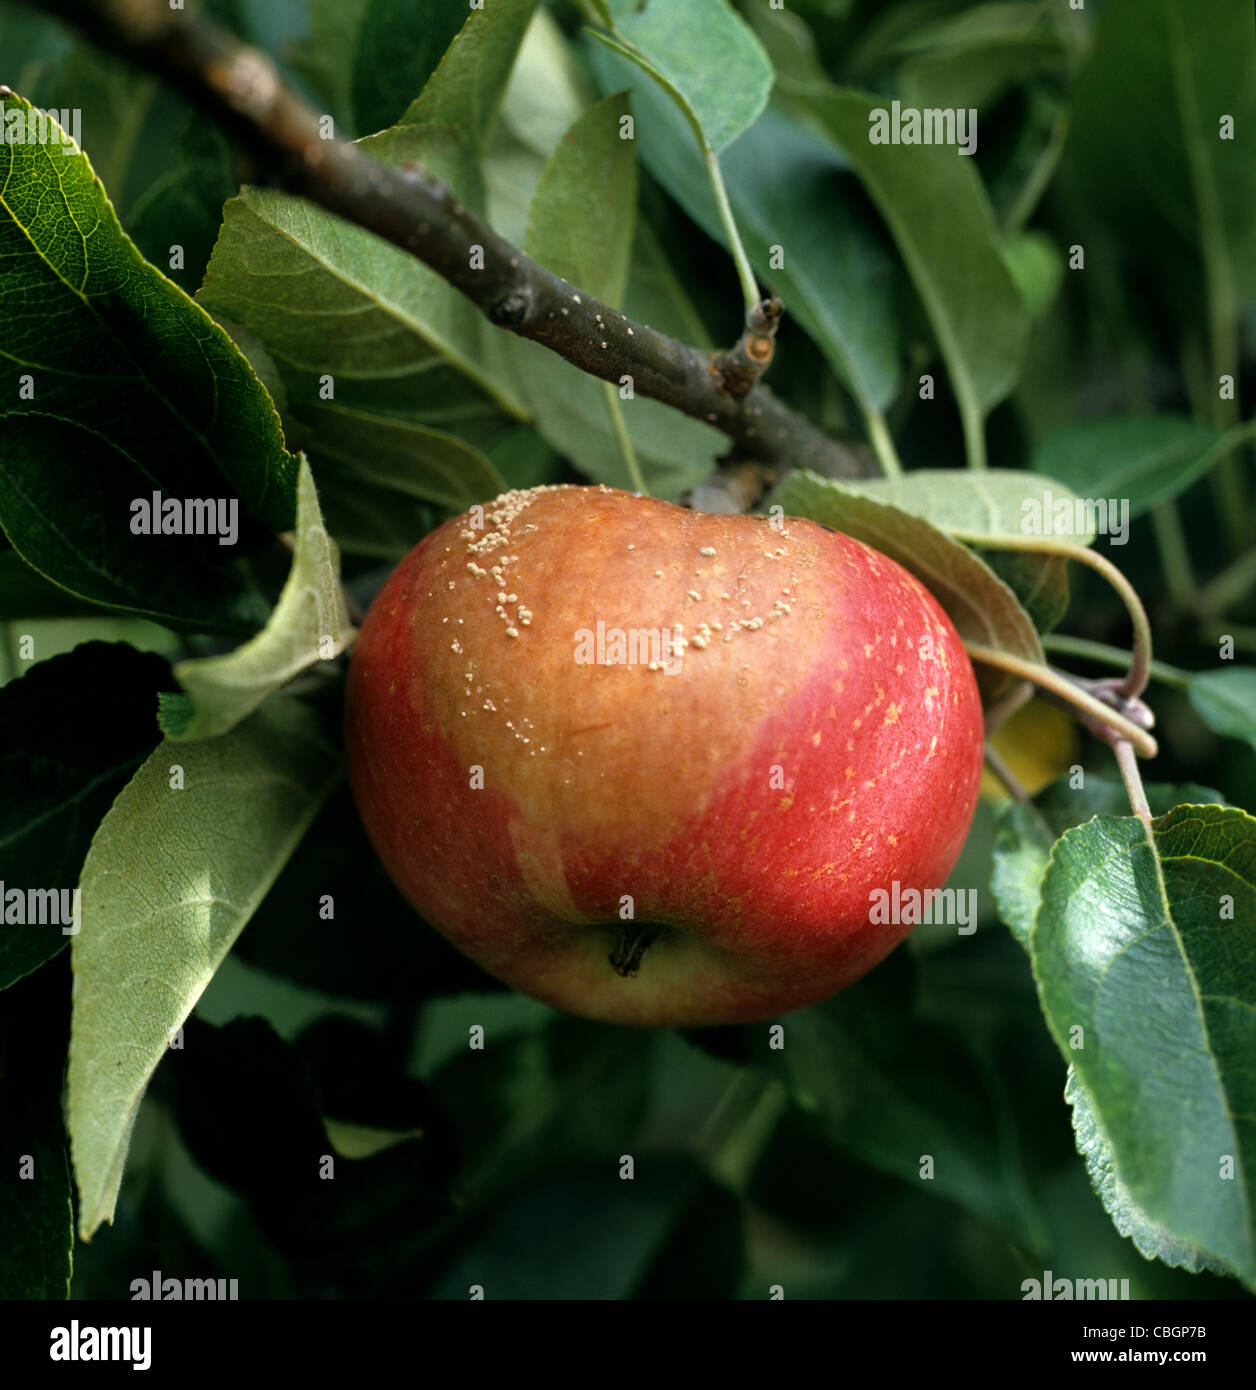 Early brown rot (Sclerotinia fructigena) development on ripe Discovery apple on the tree Stock Photo